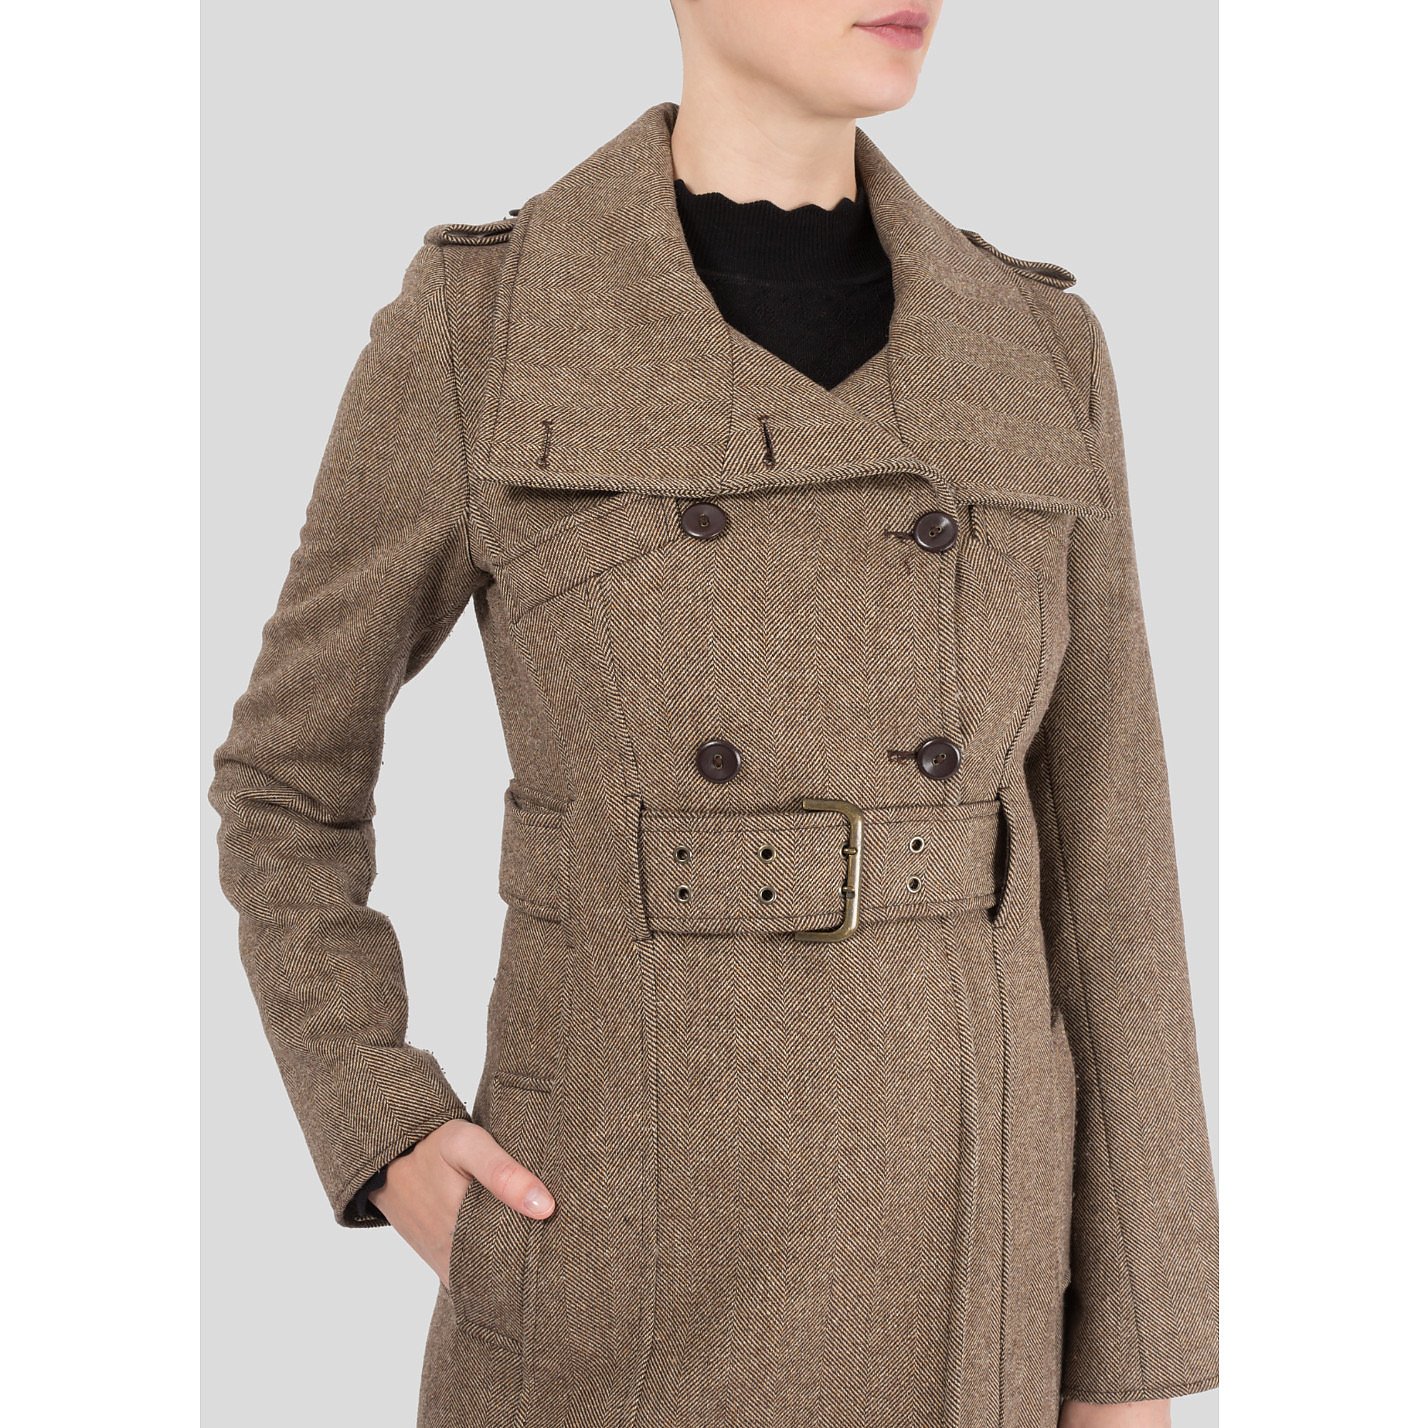 Patrizia Pepe Double Breasted Wool-Blend Coat